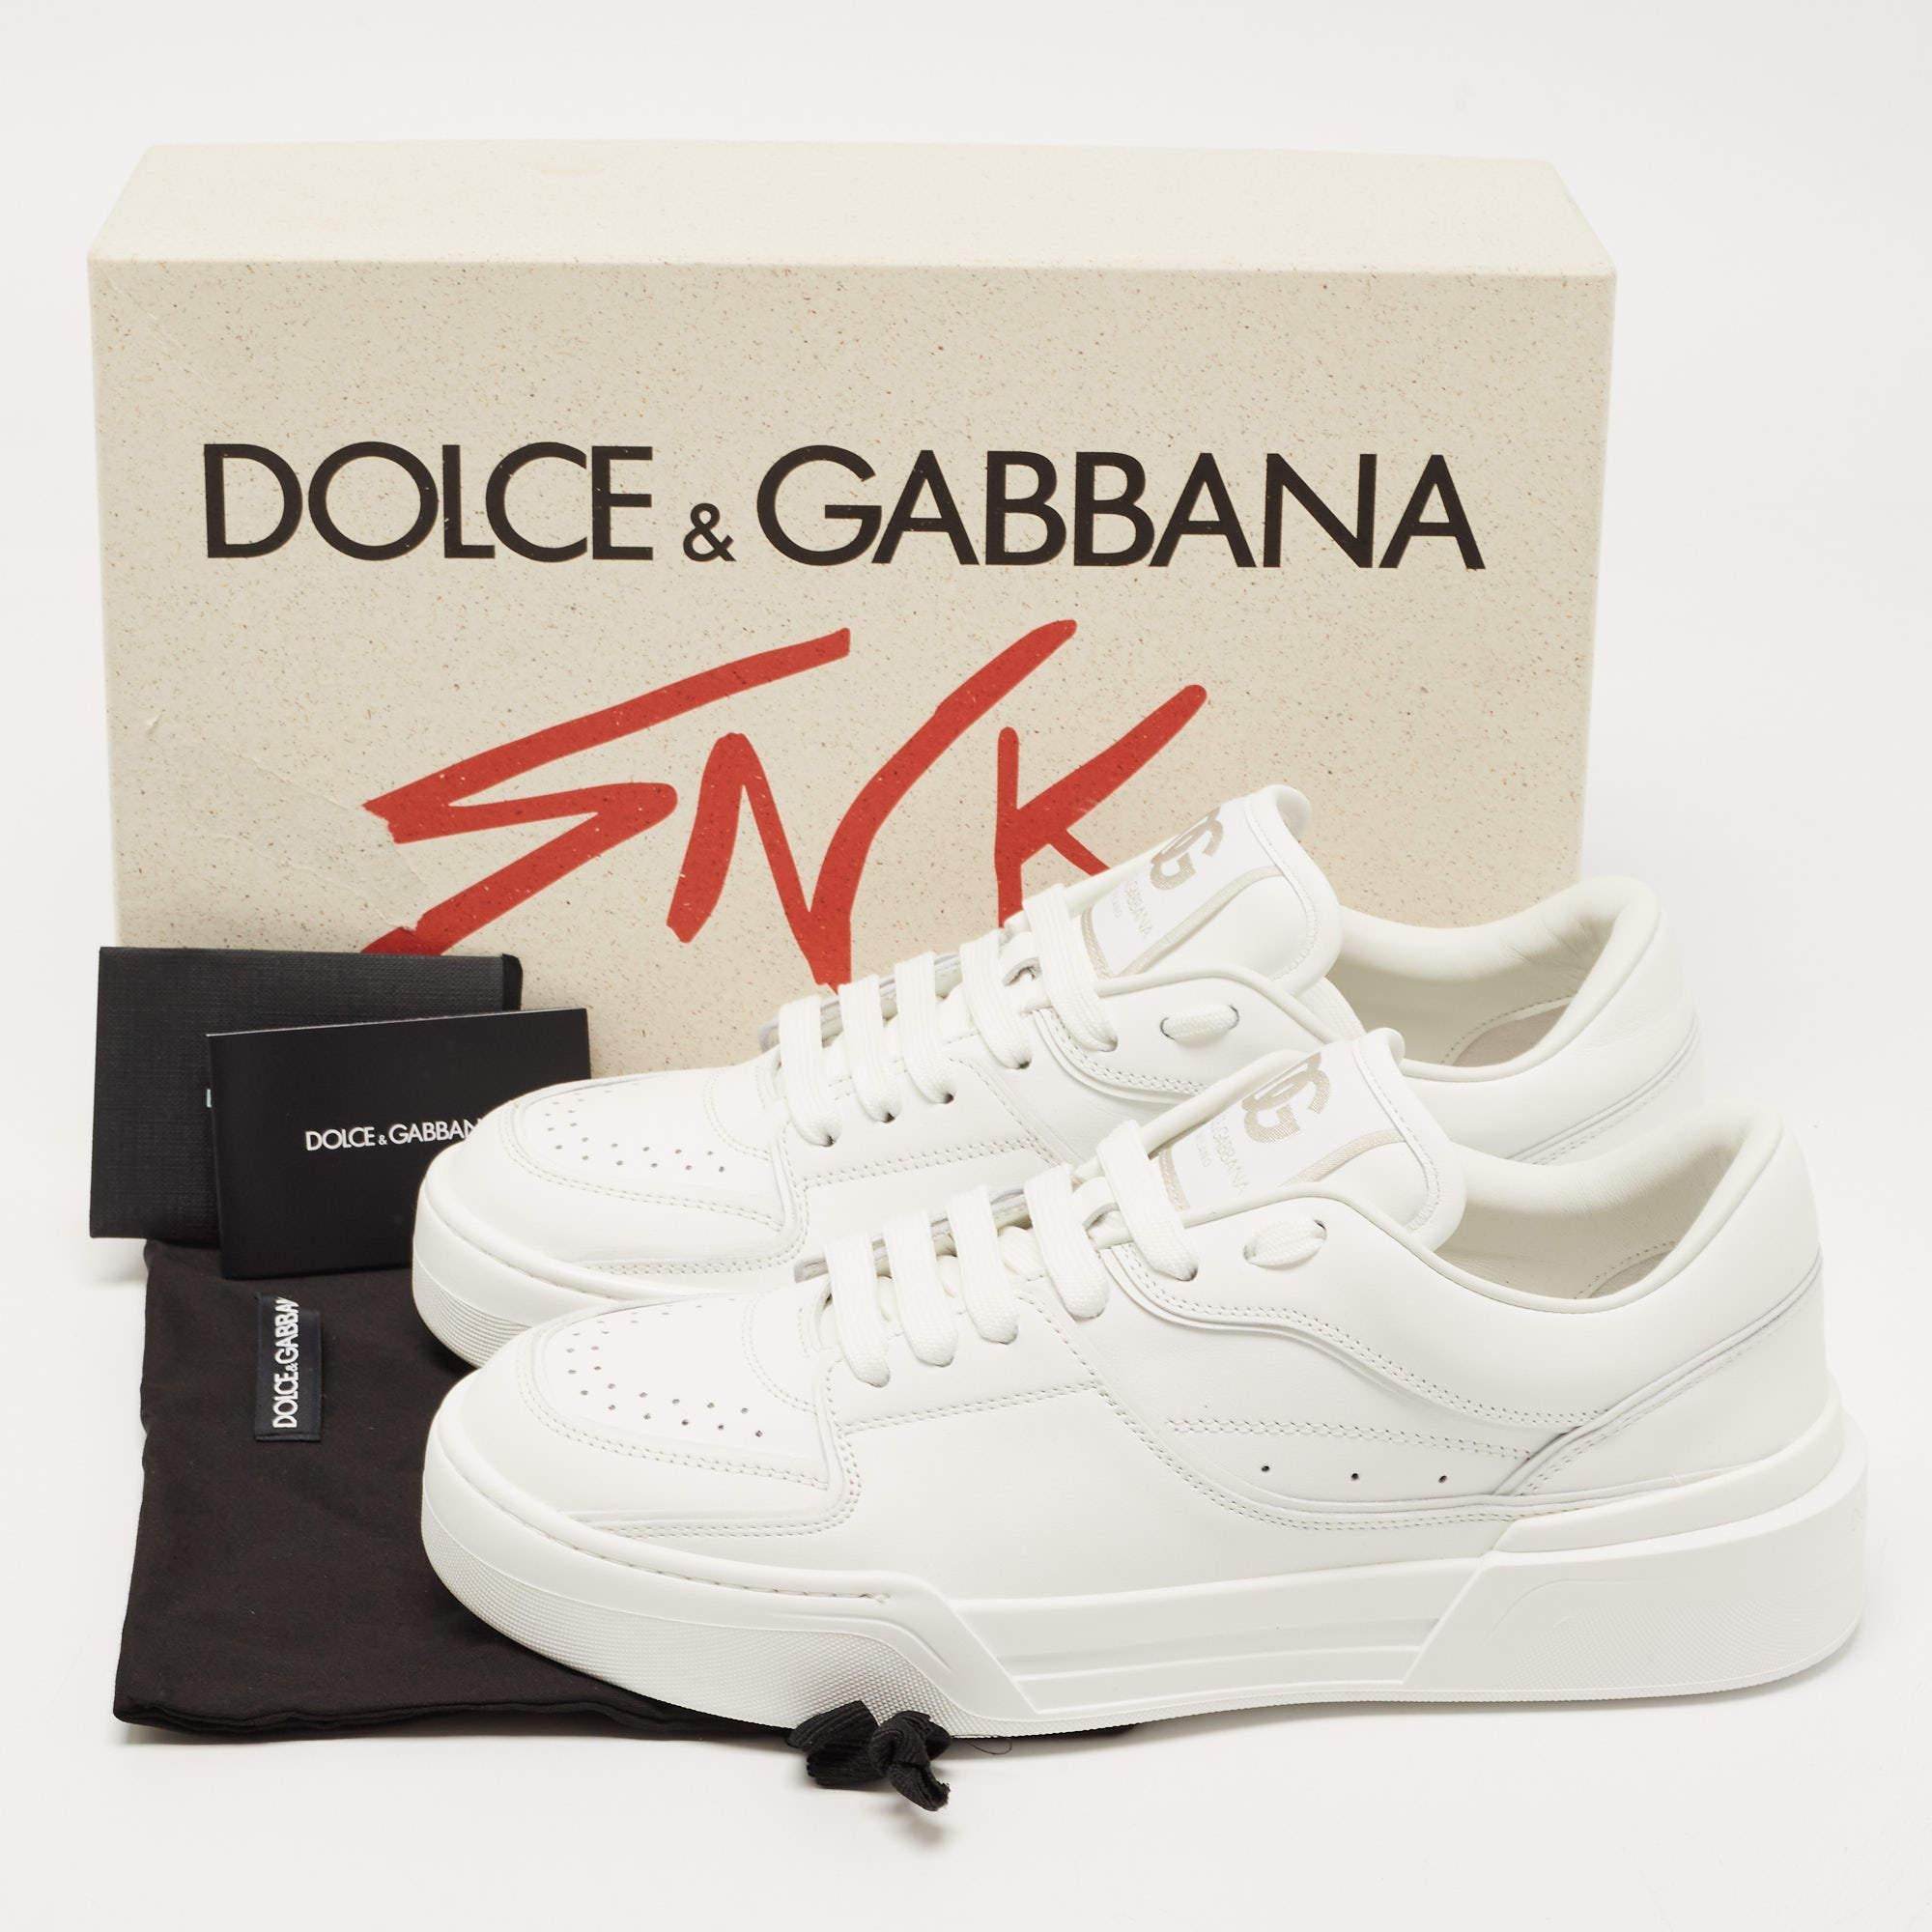 Dolce & Gabbana White Leather Roma Sneakers Size 41 5